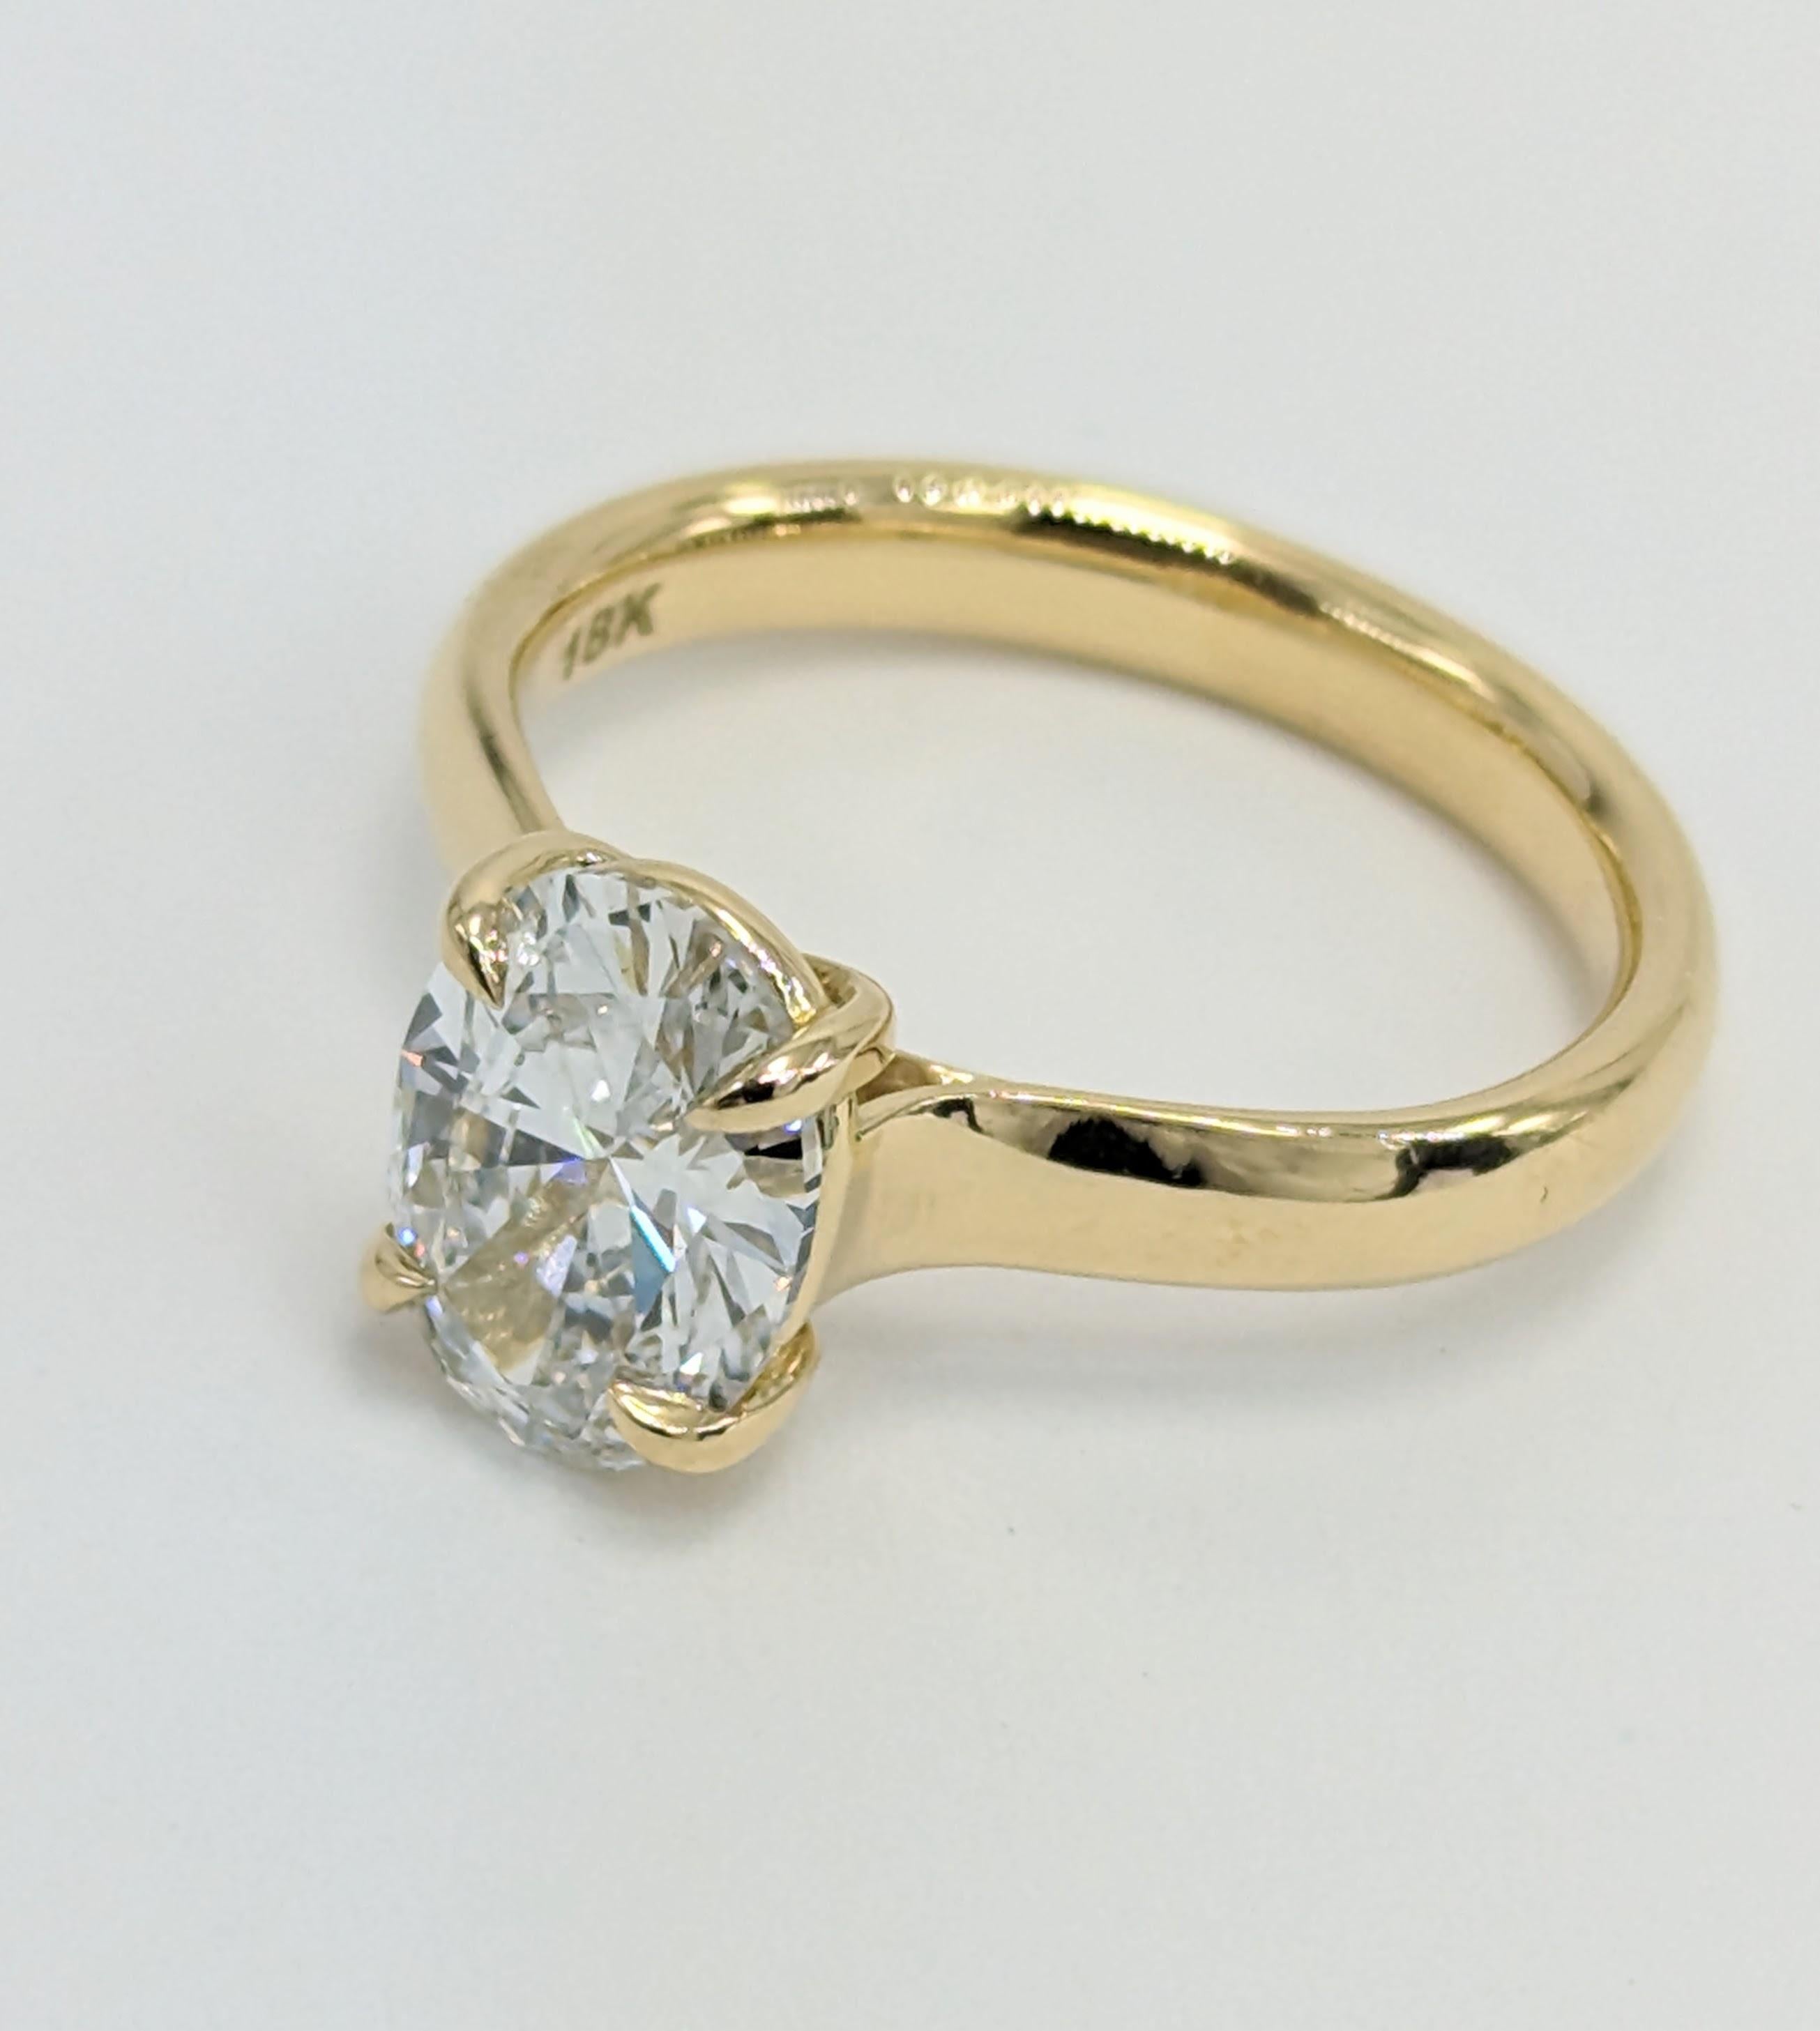 For Sale:  GIA 1.51 Certified Diamond  Engagement Ring in 18 Karat Gold 6